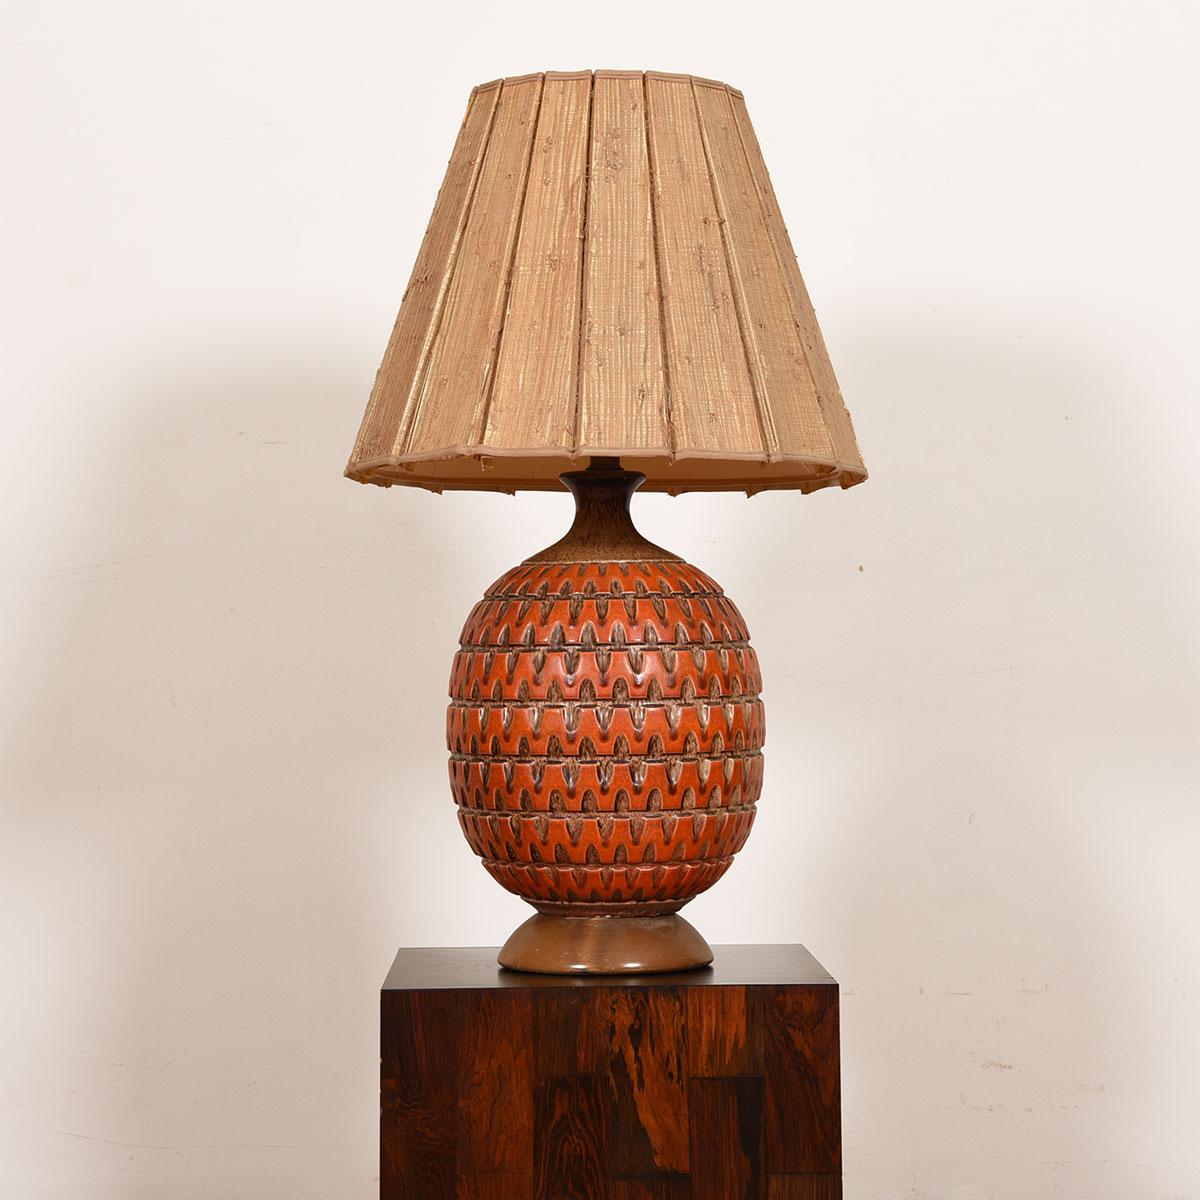 Oversized Decorator Lamp in Burnt Orange with Great Texture & Presence

Additional information:
Material: Walnut
Featured at Kensington:
Fun, oversized MCM Lamp in Burnt Orange.
Place it in your room to add texture and presence.
Zigzag